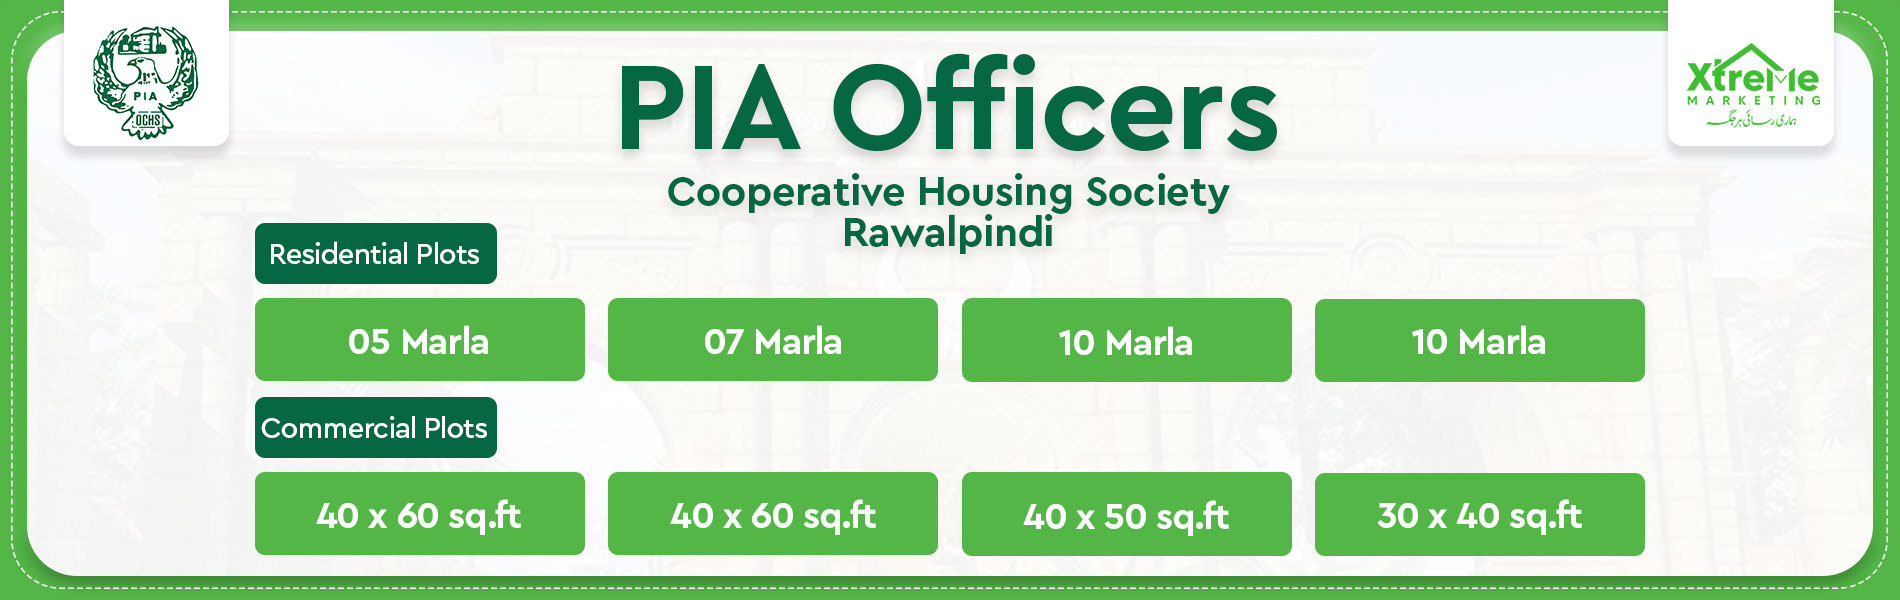 pia-officers-cooperative-housing-society-rawalpindi-payment-plans